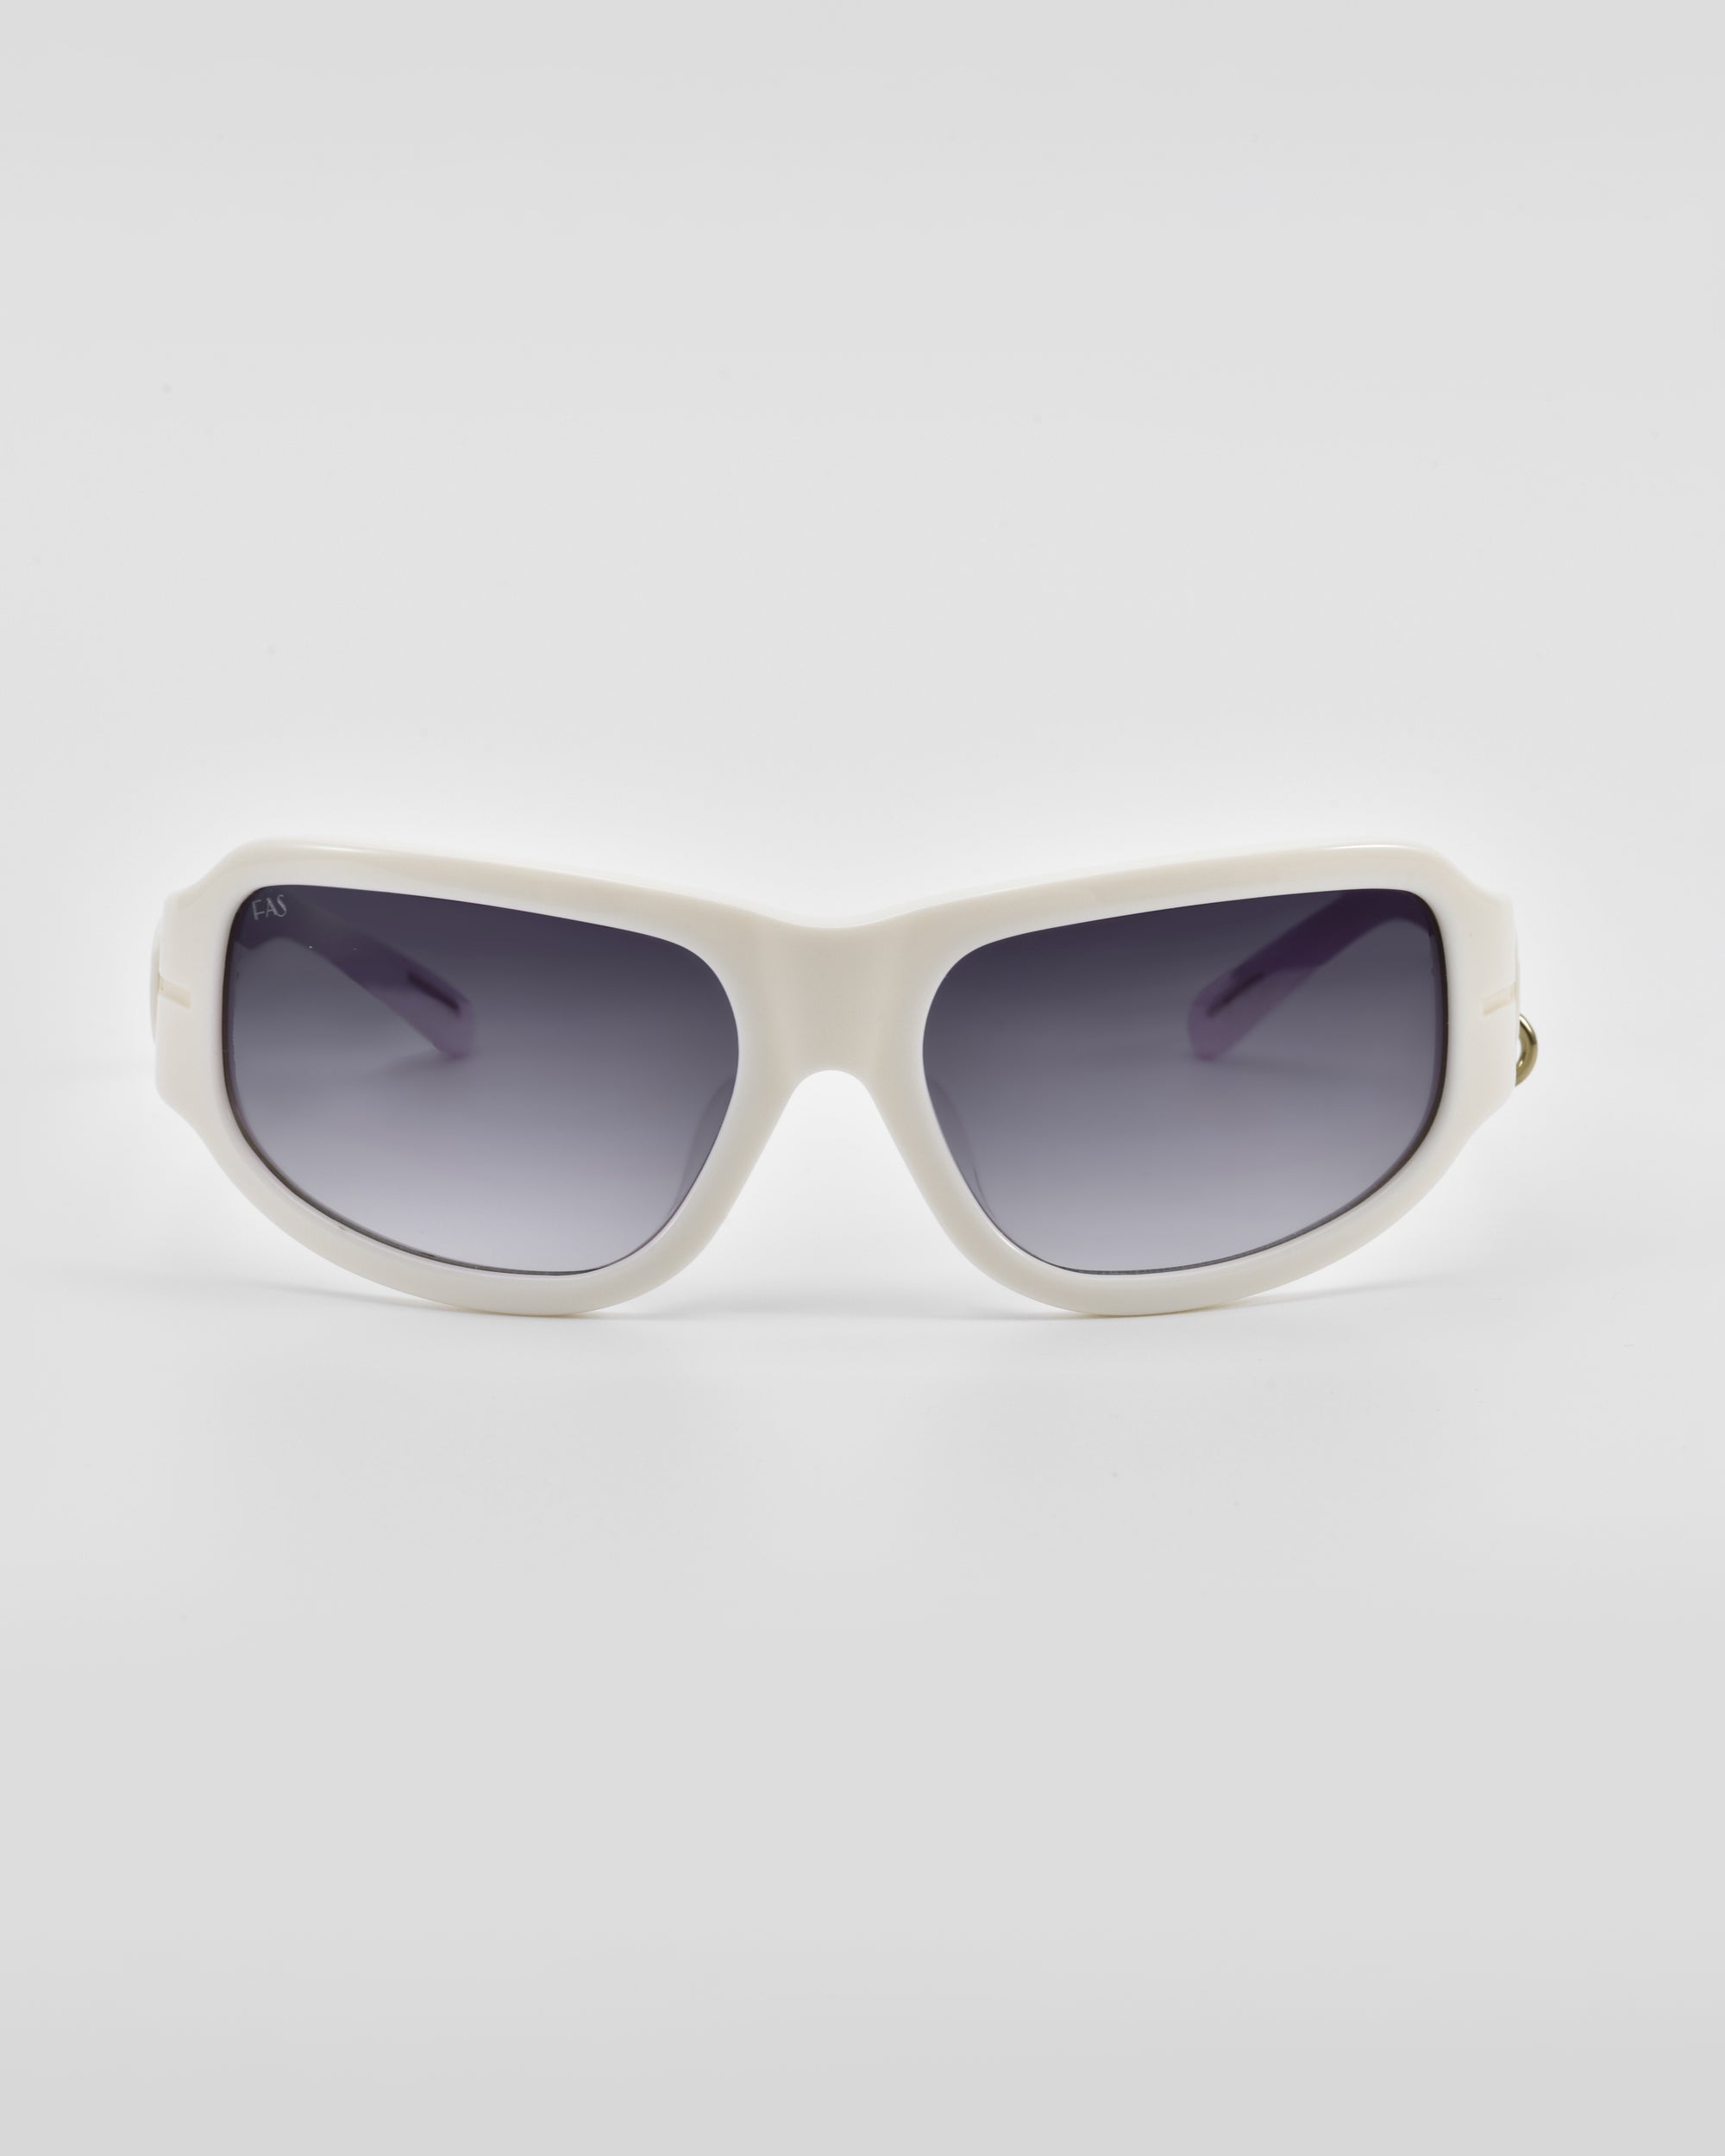 A pair of white-framed For Art&#39;s Sake® Raven sunglasses with dark, gradient lenses is displayed against a plain, light gray background. The sunglasses have a sleek, modern design with a slightly curved temple.